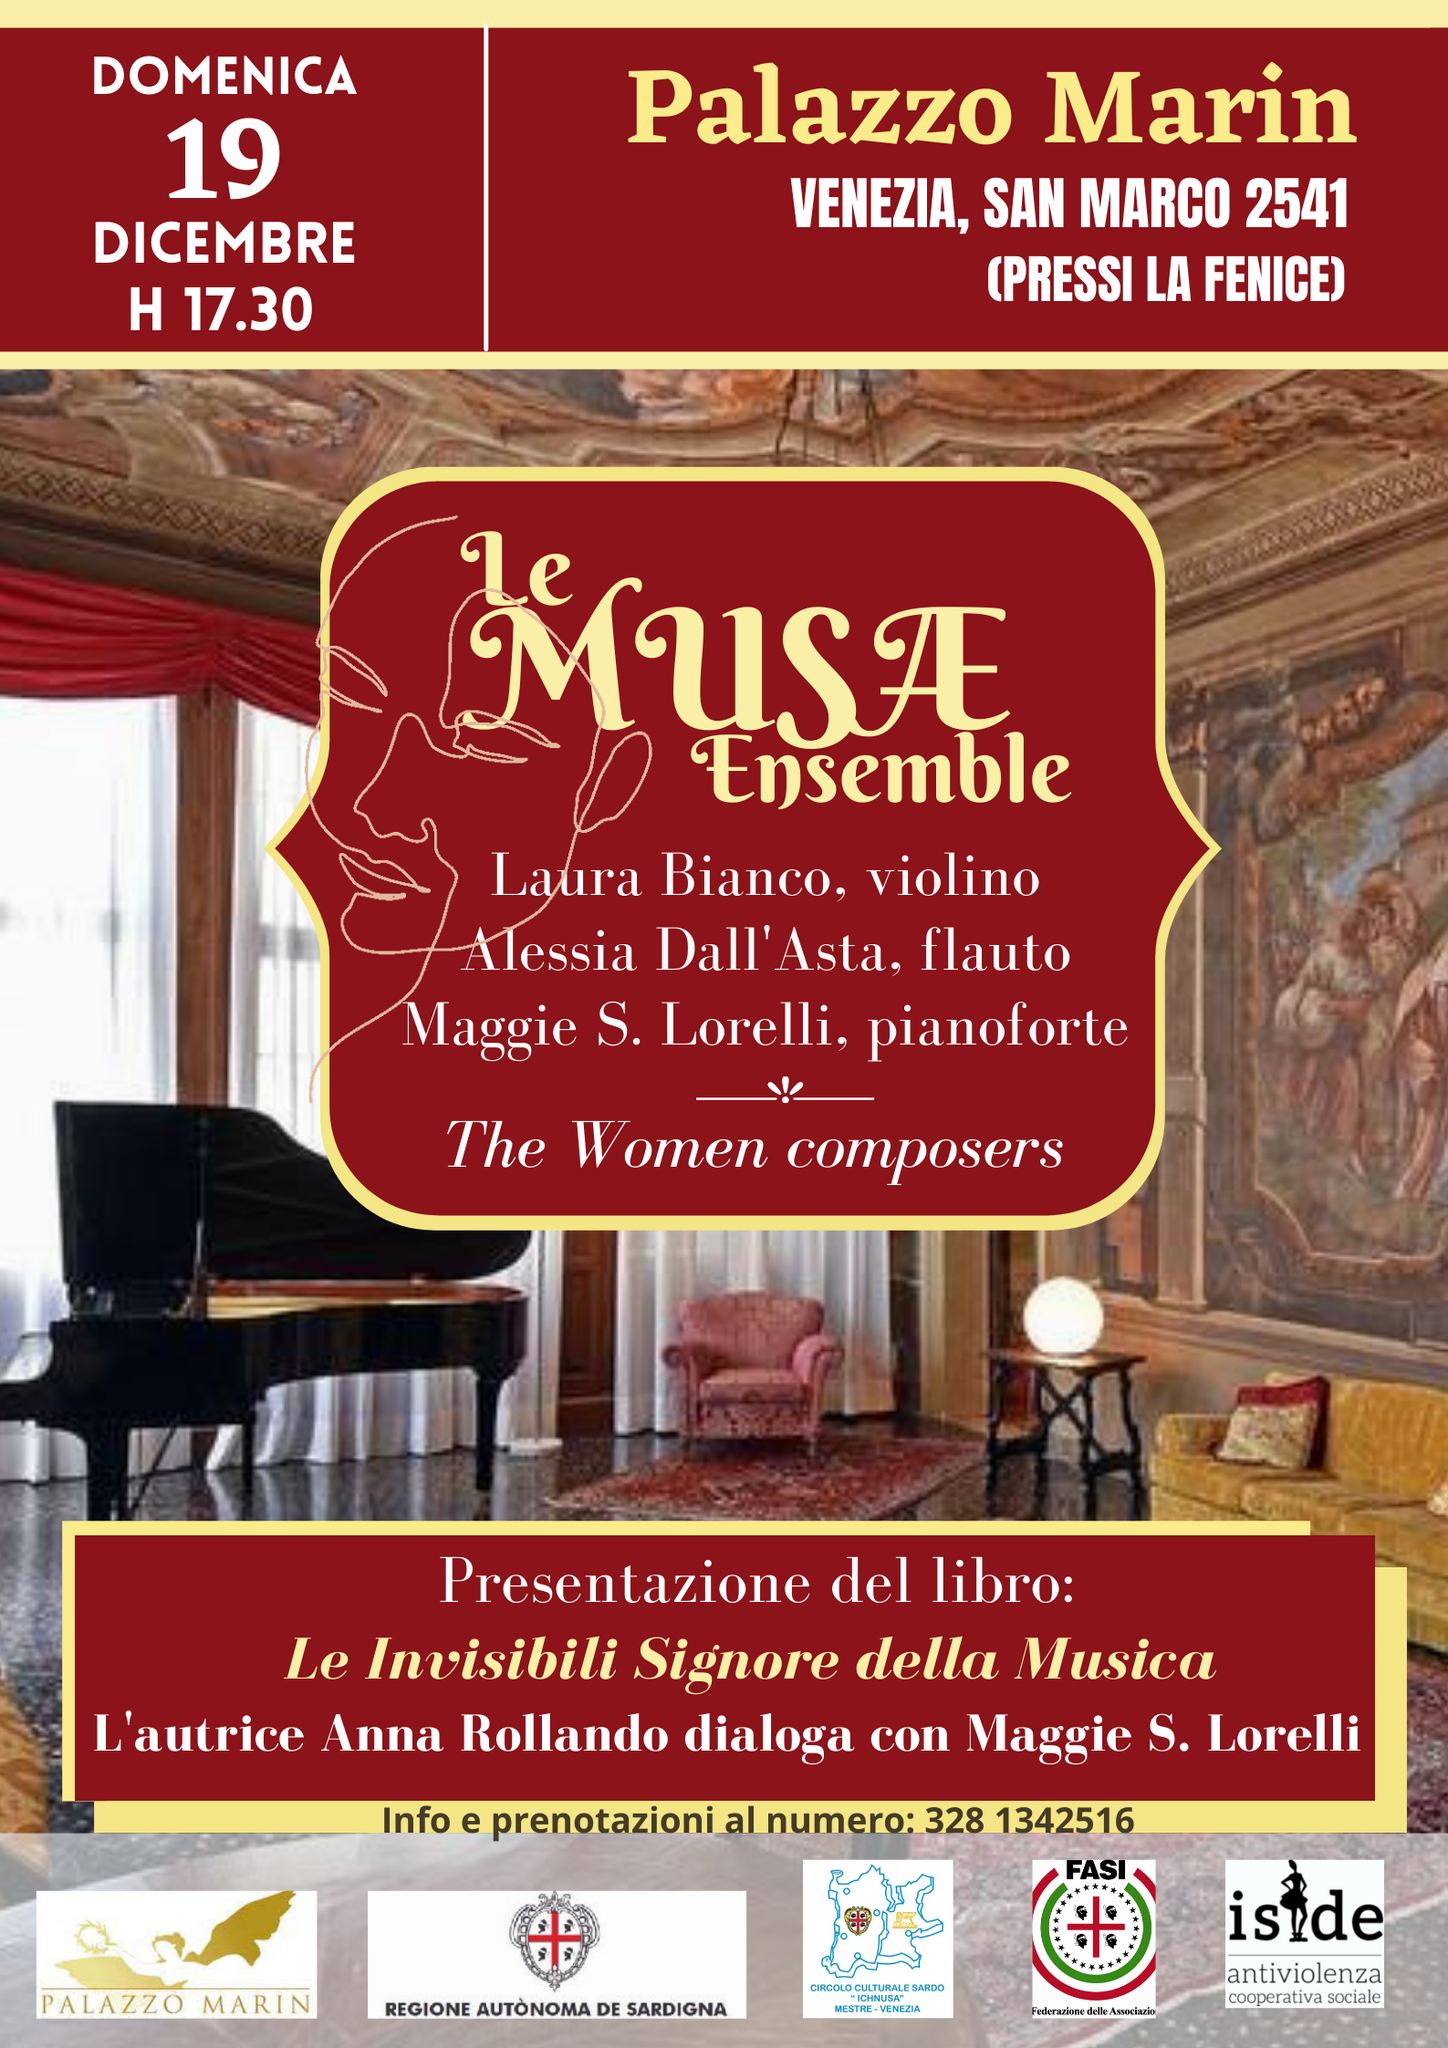 Poster for Palazzo Marin Concert 19 12 21